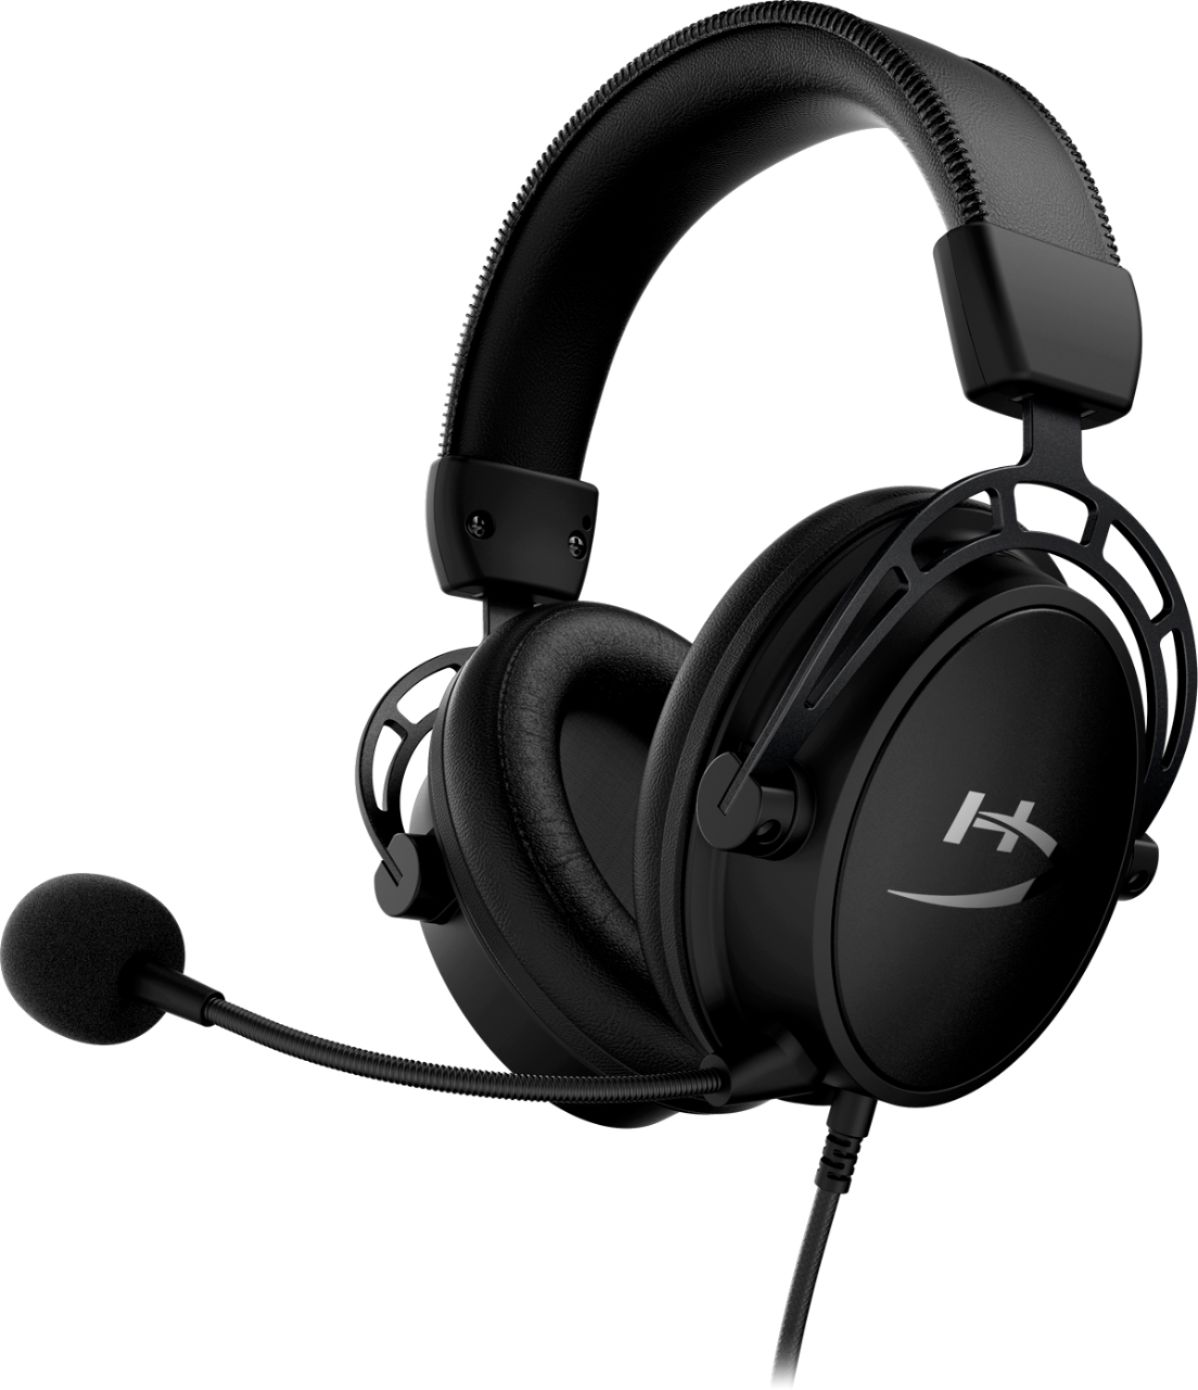 HyperX Cloud Alpha Pro Wired Gaming Headset (Detachable Mic and Audio Cable) for PC, PS4 and Xbox $60